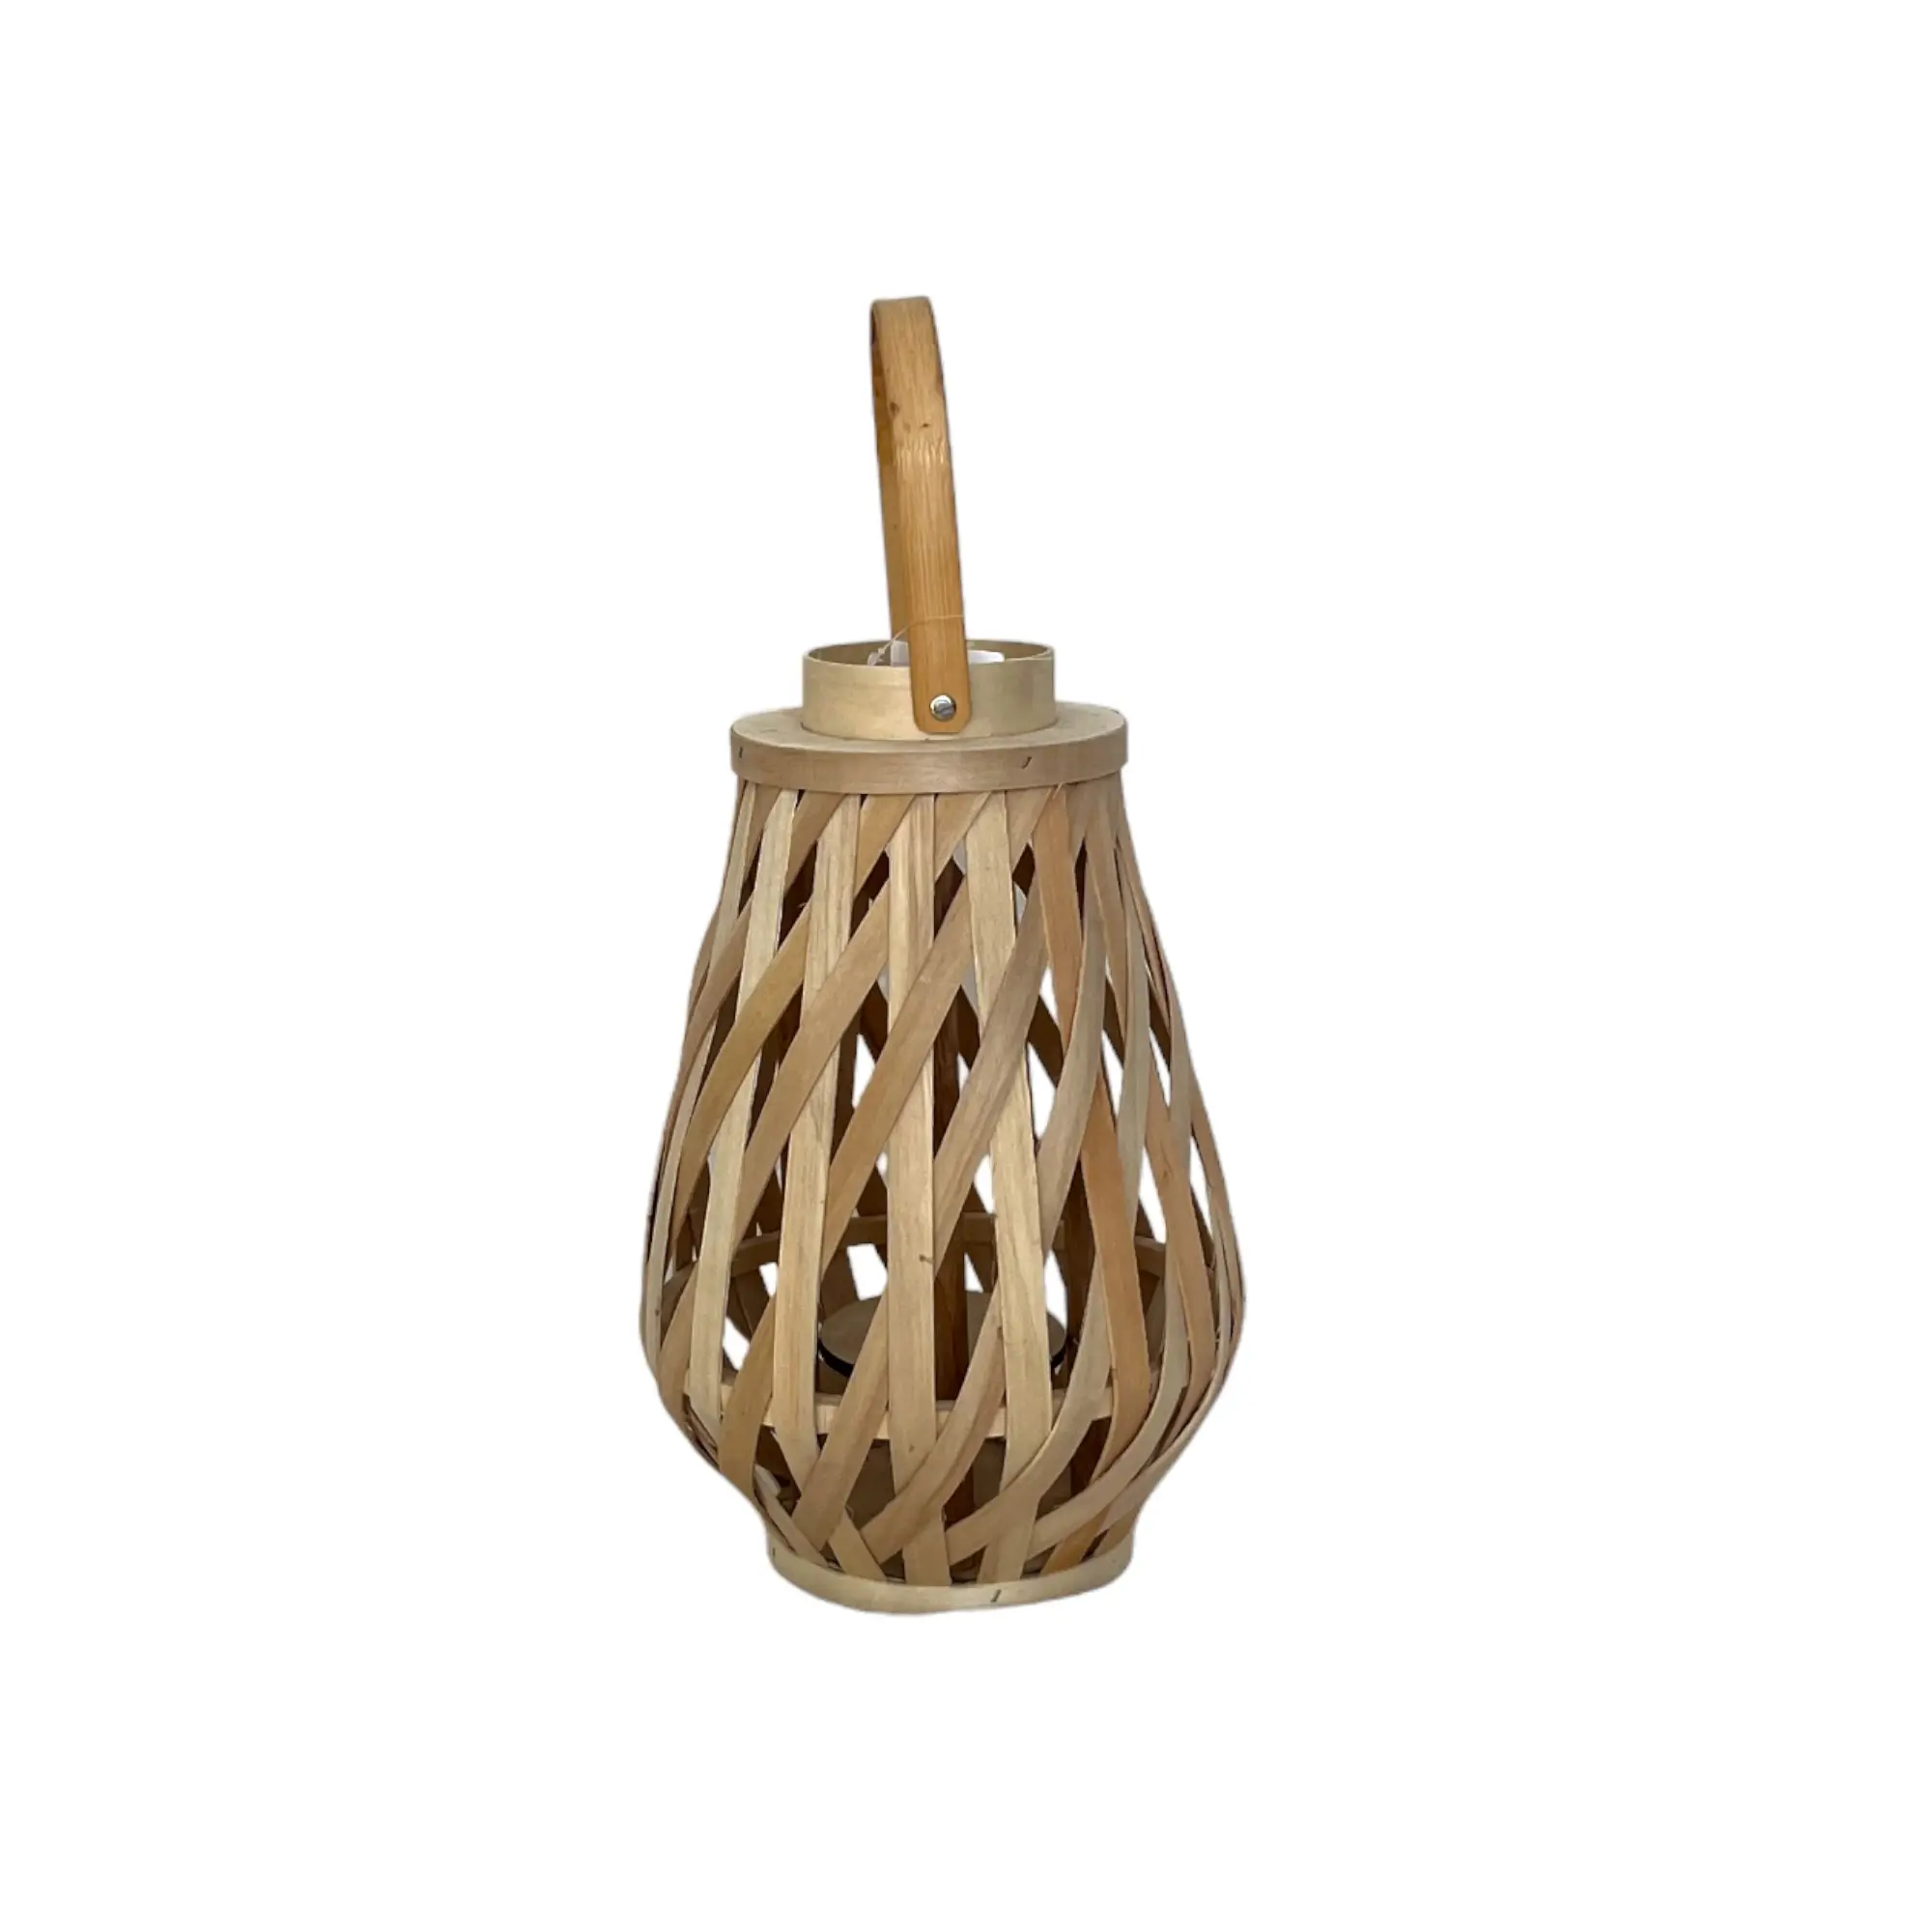 High Quality Natural new Handmade Bamboo Lantern Candle With Battery Bulb For Home Decor Or Christmas